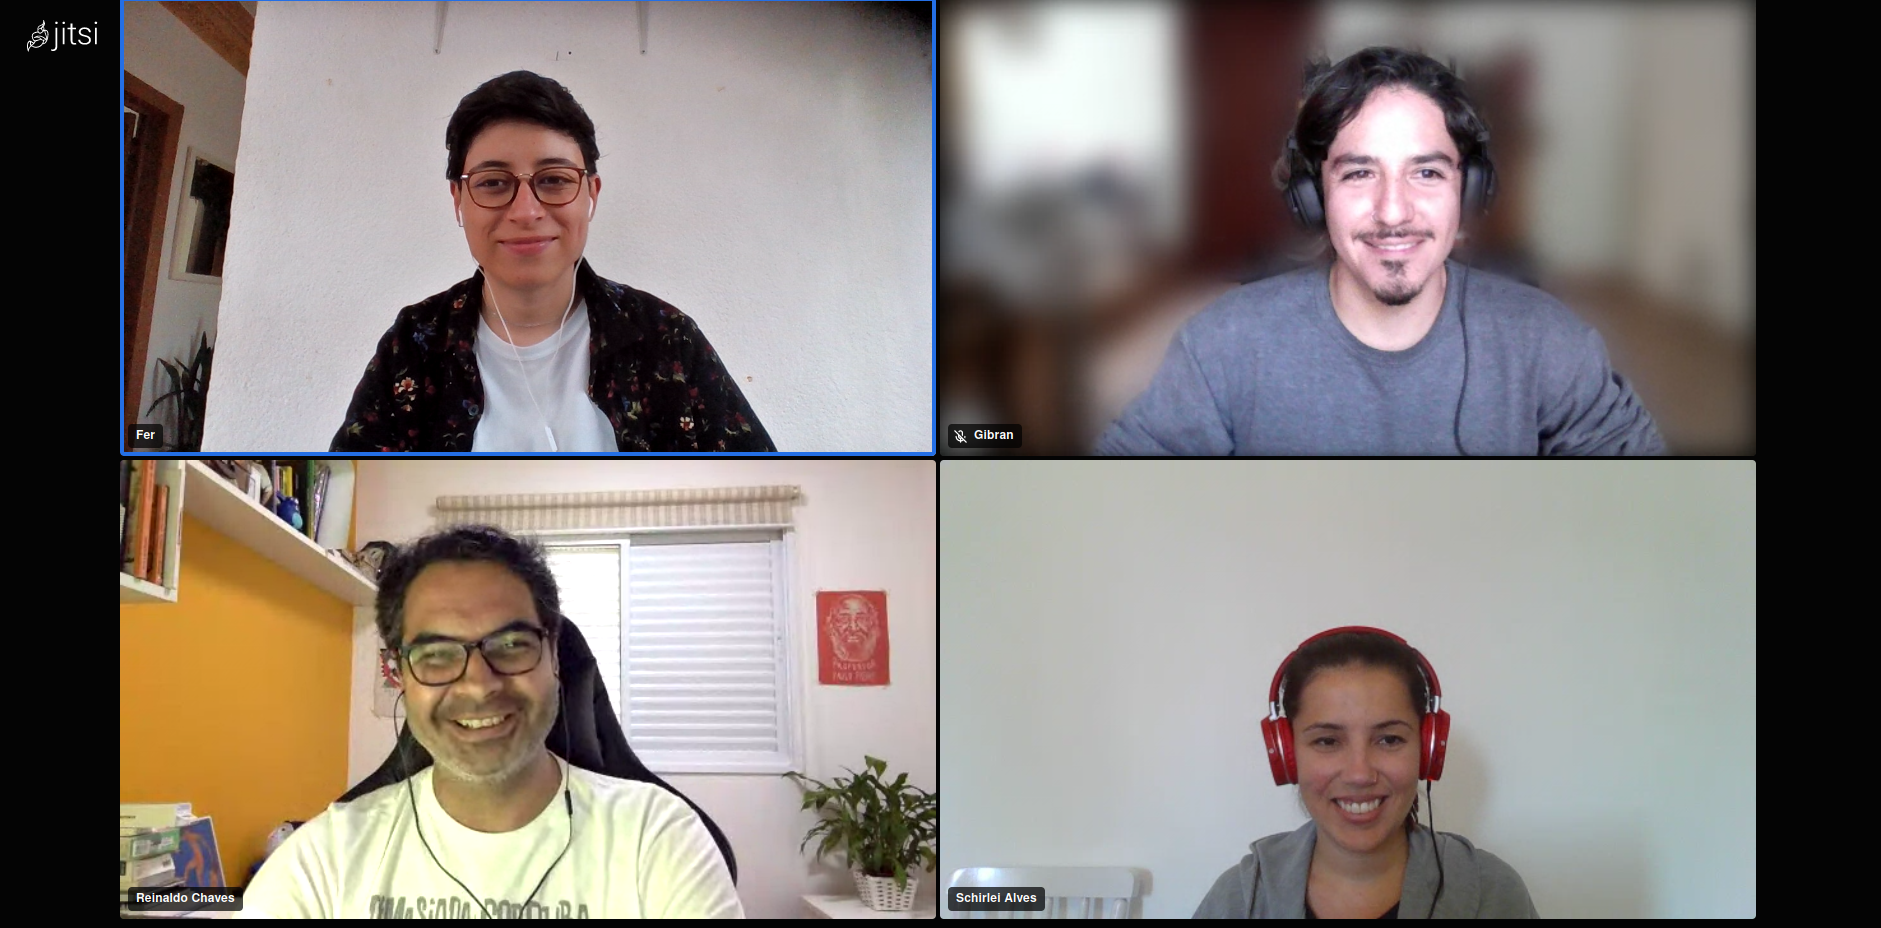 Fernanda Aguirre and Gibrán Mena, from Mexico's Data Critica; and Reinaldo Chaves and Schirlei Alves, from Brazil's Abraji, speak during an online conference.